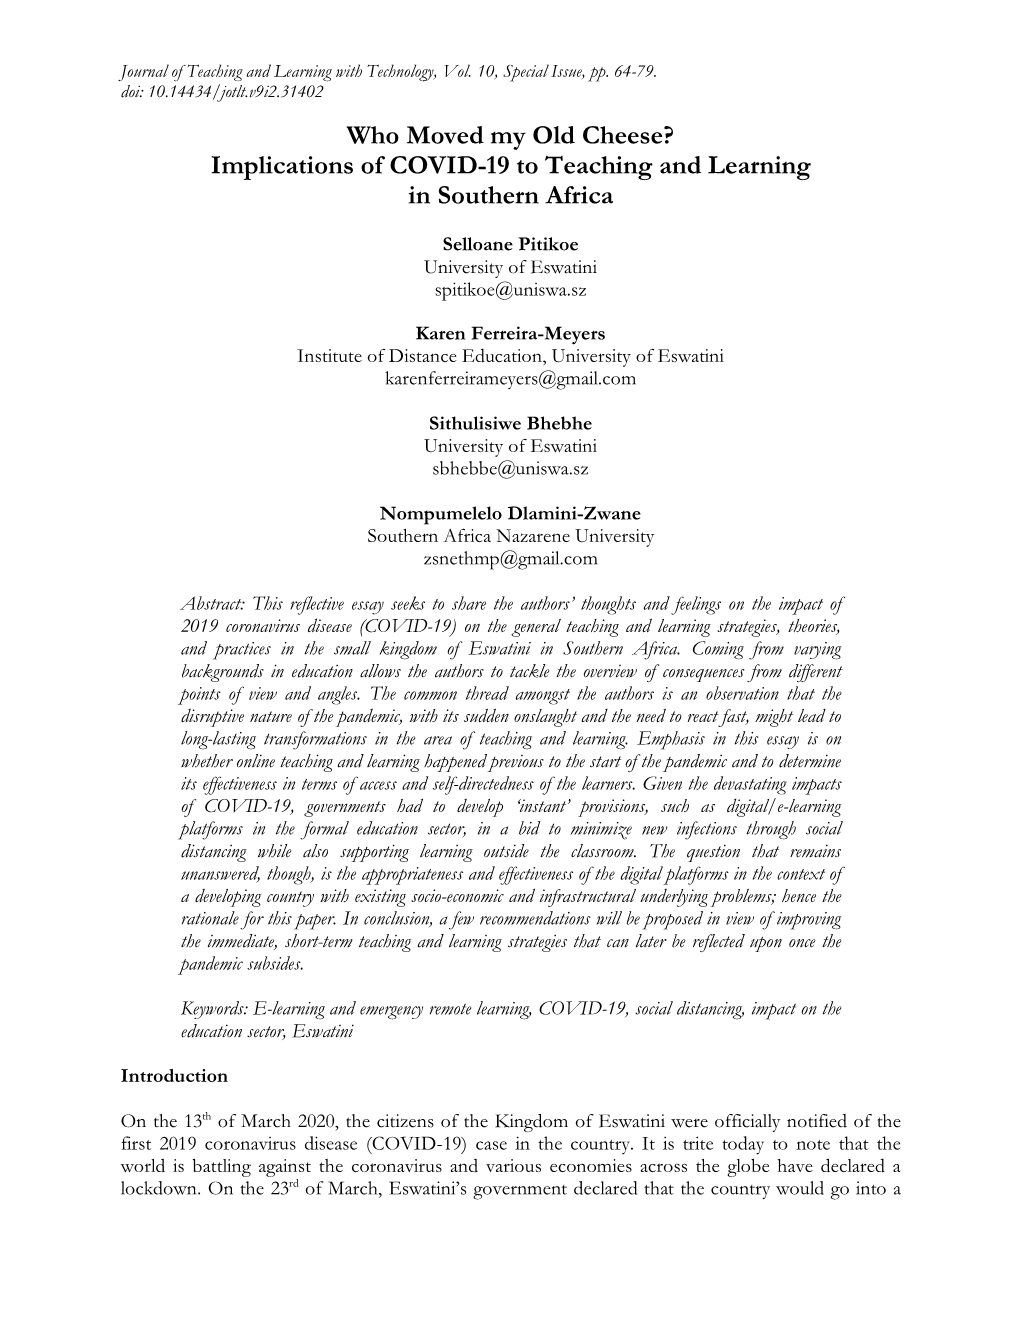 Implications of COVID-19 to Teaching and Learning in Southern Africa